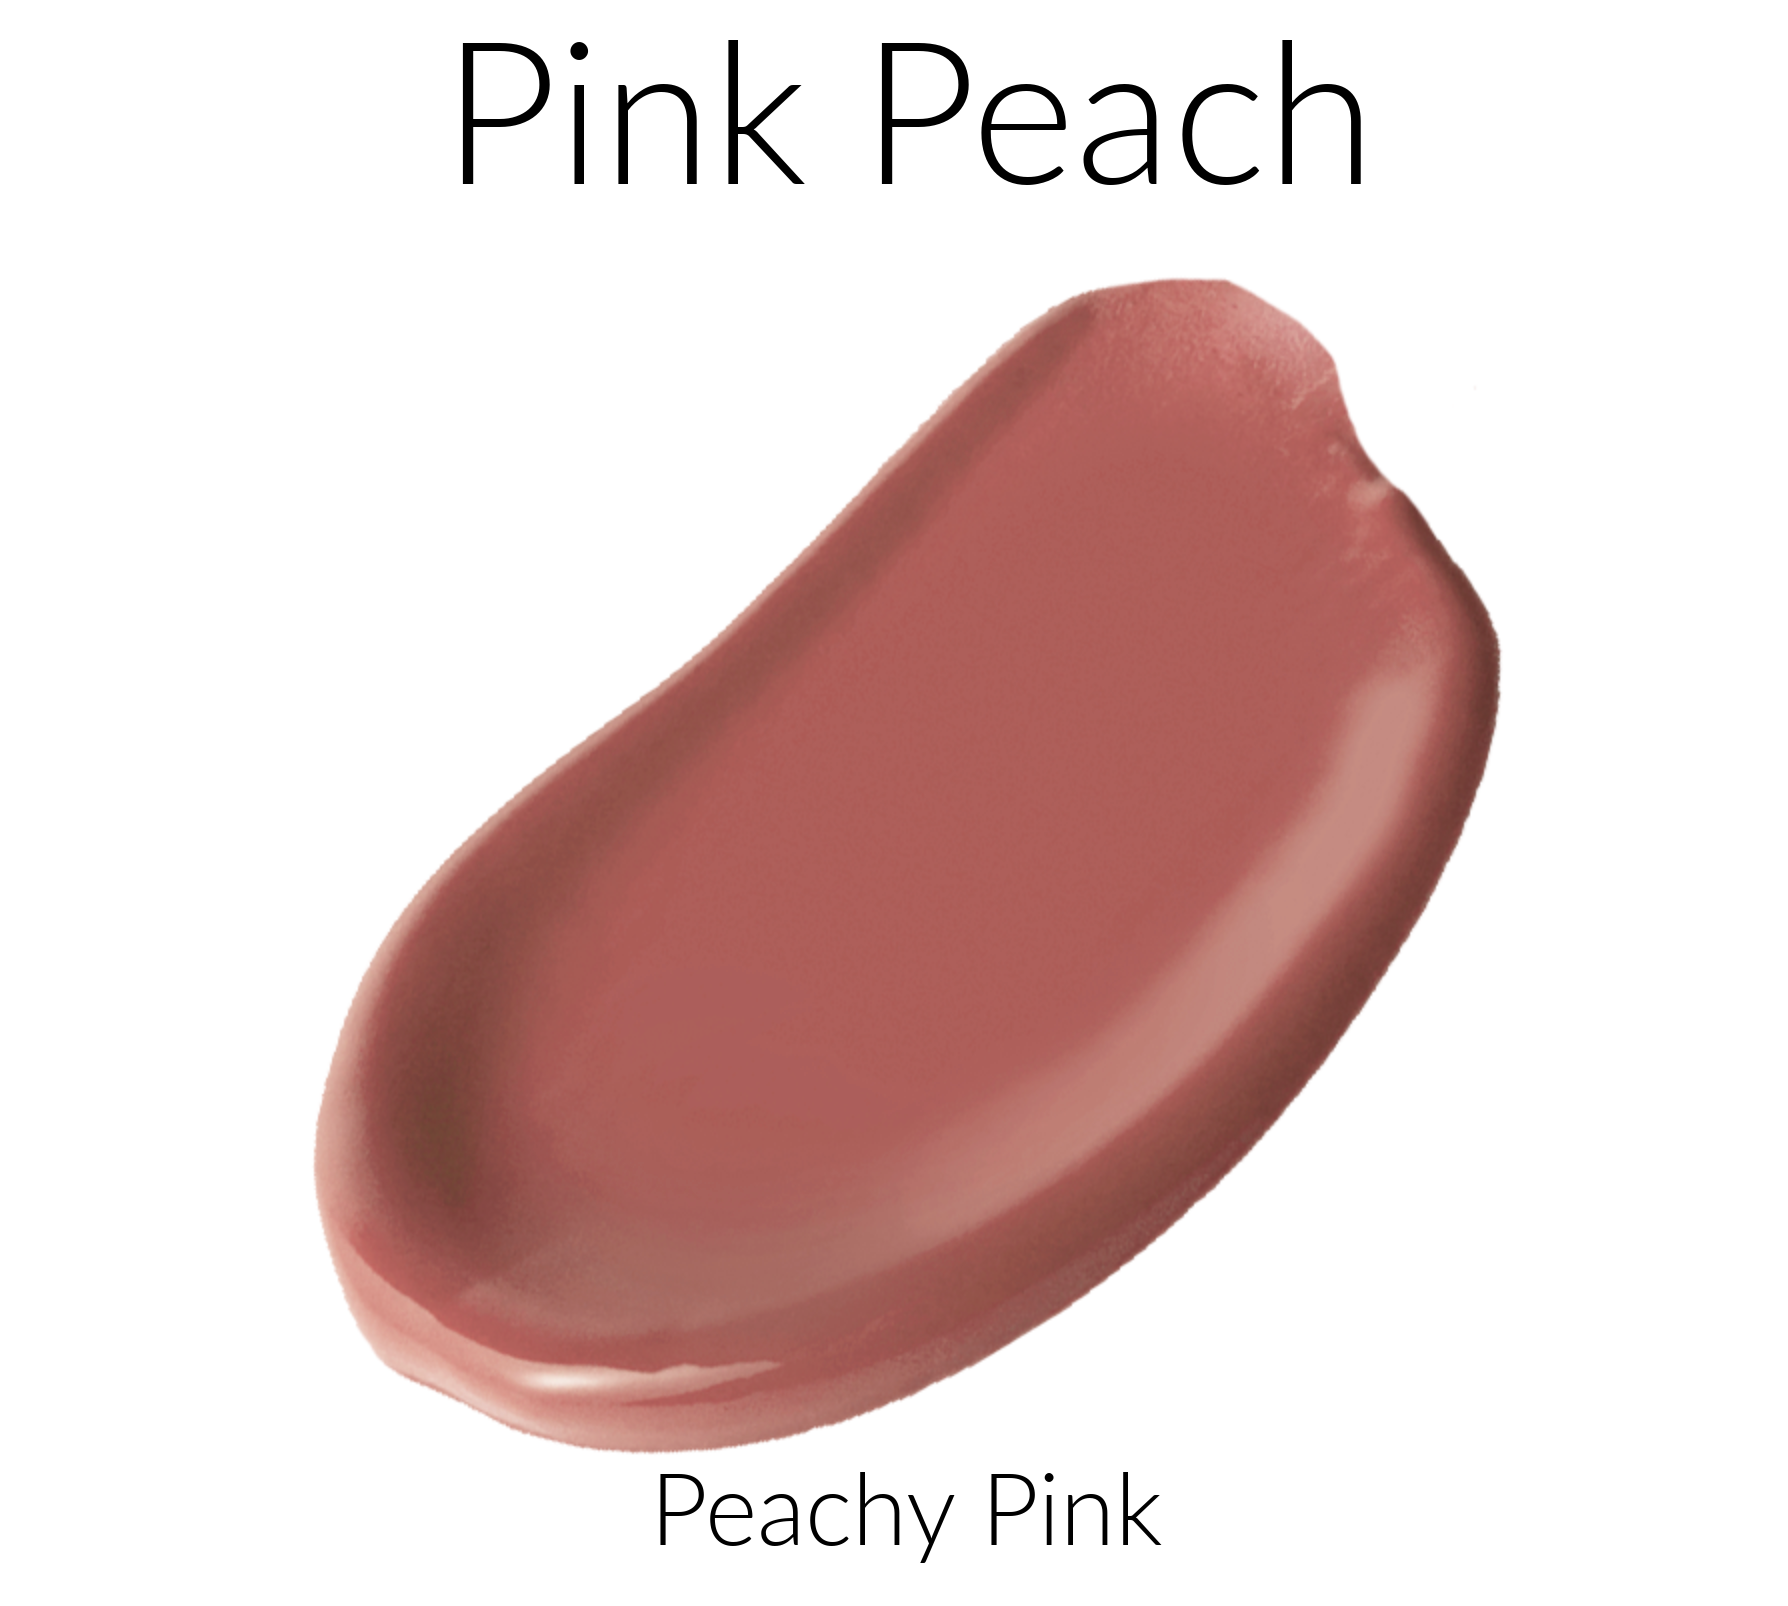 Pink Peach Peachy Pink All Nighter Liquid Lipstick Color Swatch